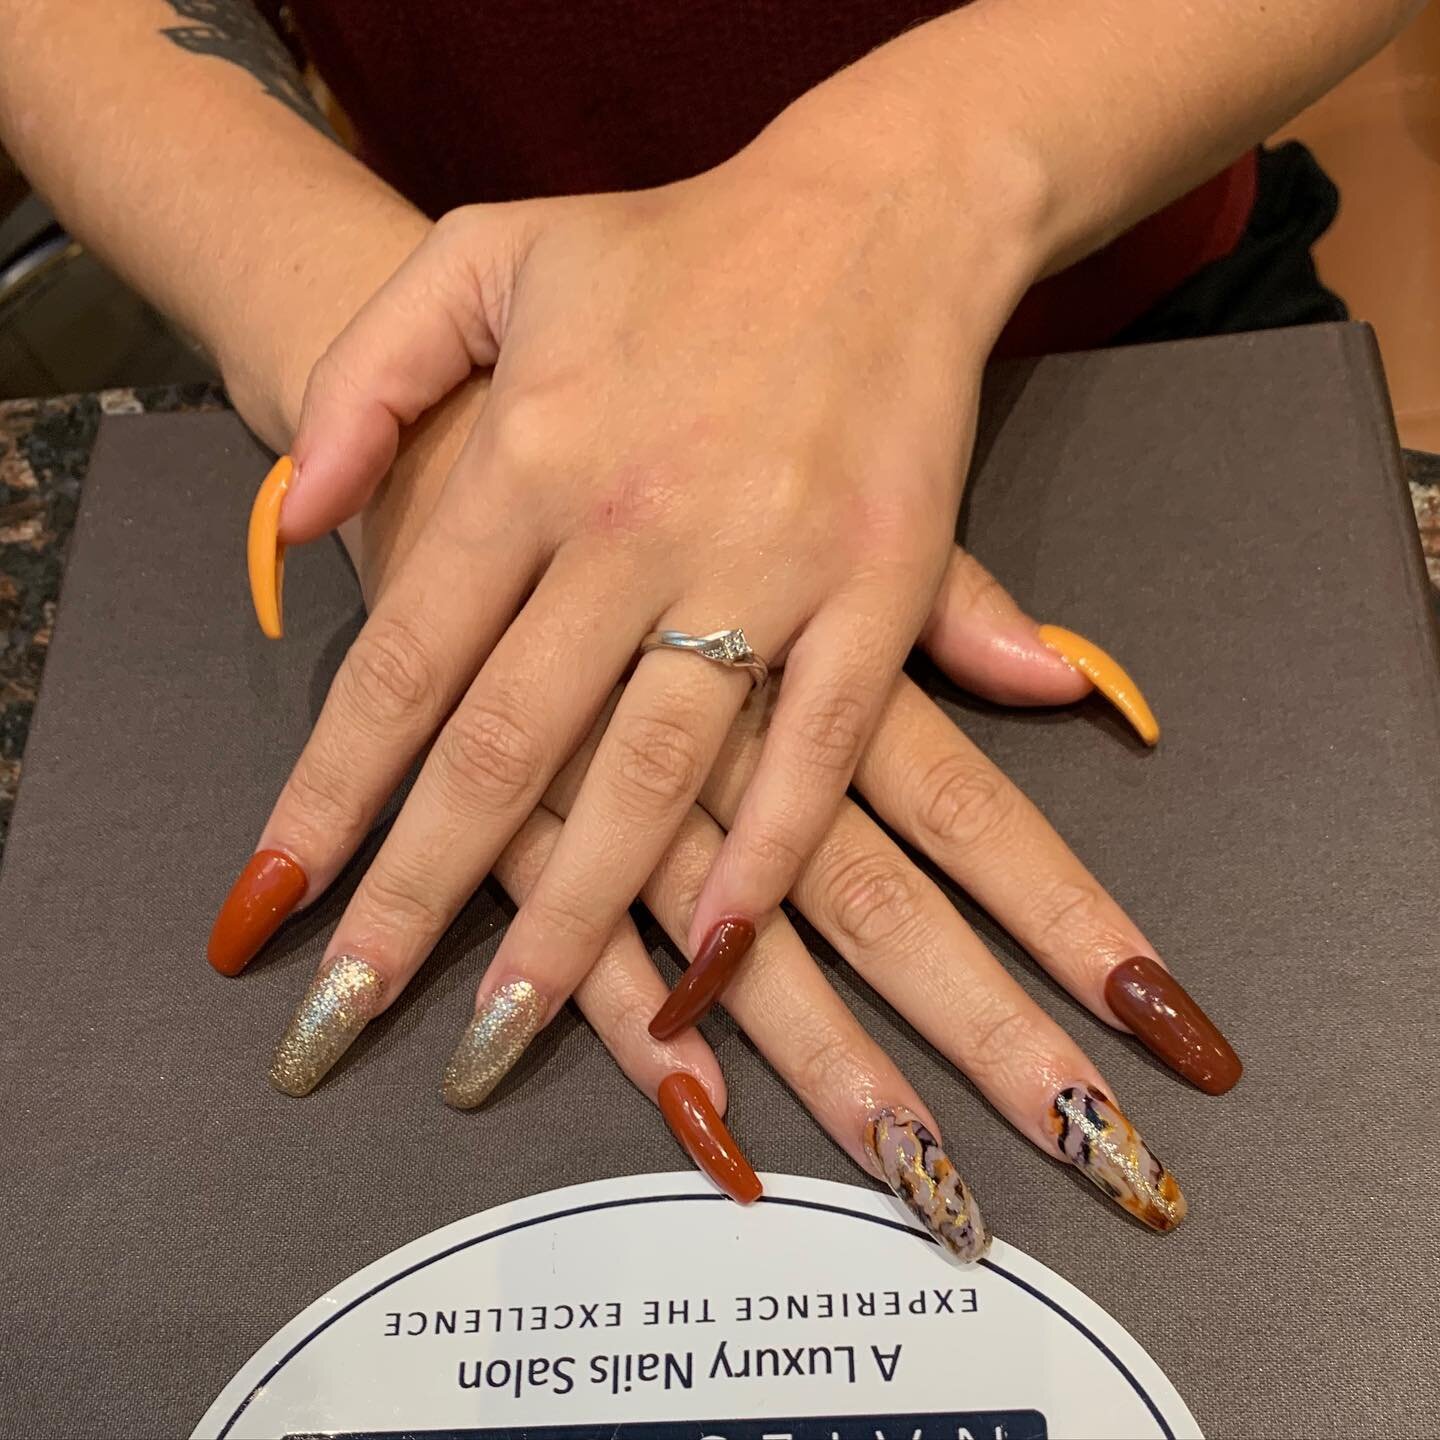 These nails have me fall-ing in love 🍂🍁

#nails #austin #austinnails #localbusiness #nailart #nailsofinstagram #instanails #acrylicnails #gelnails #smallbusiness